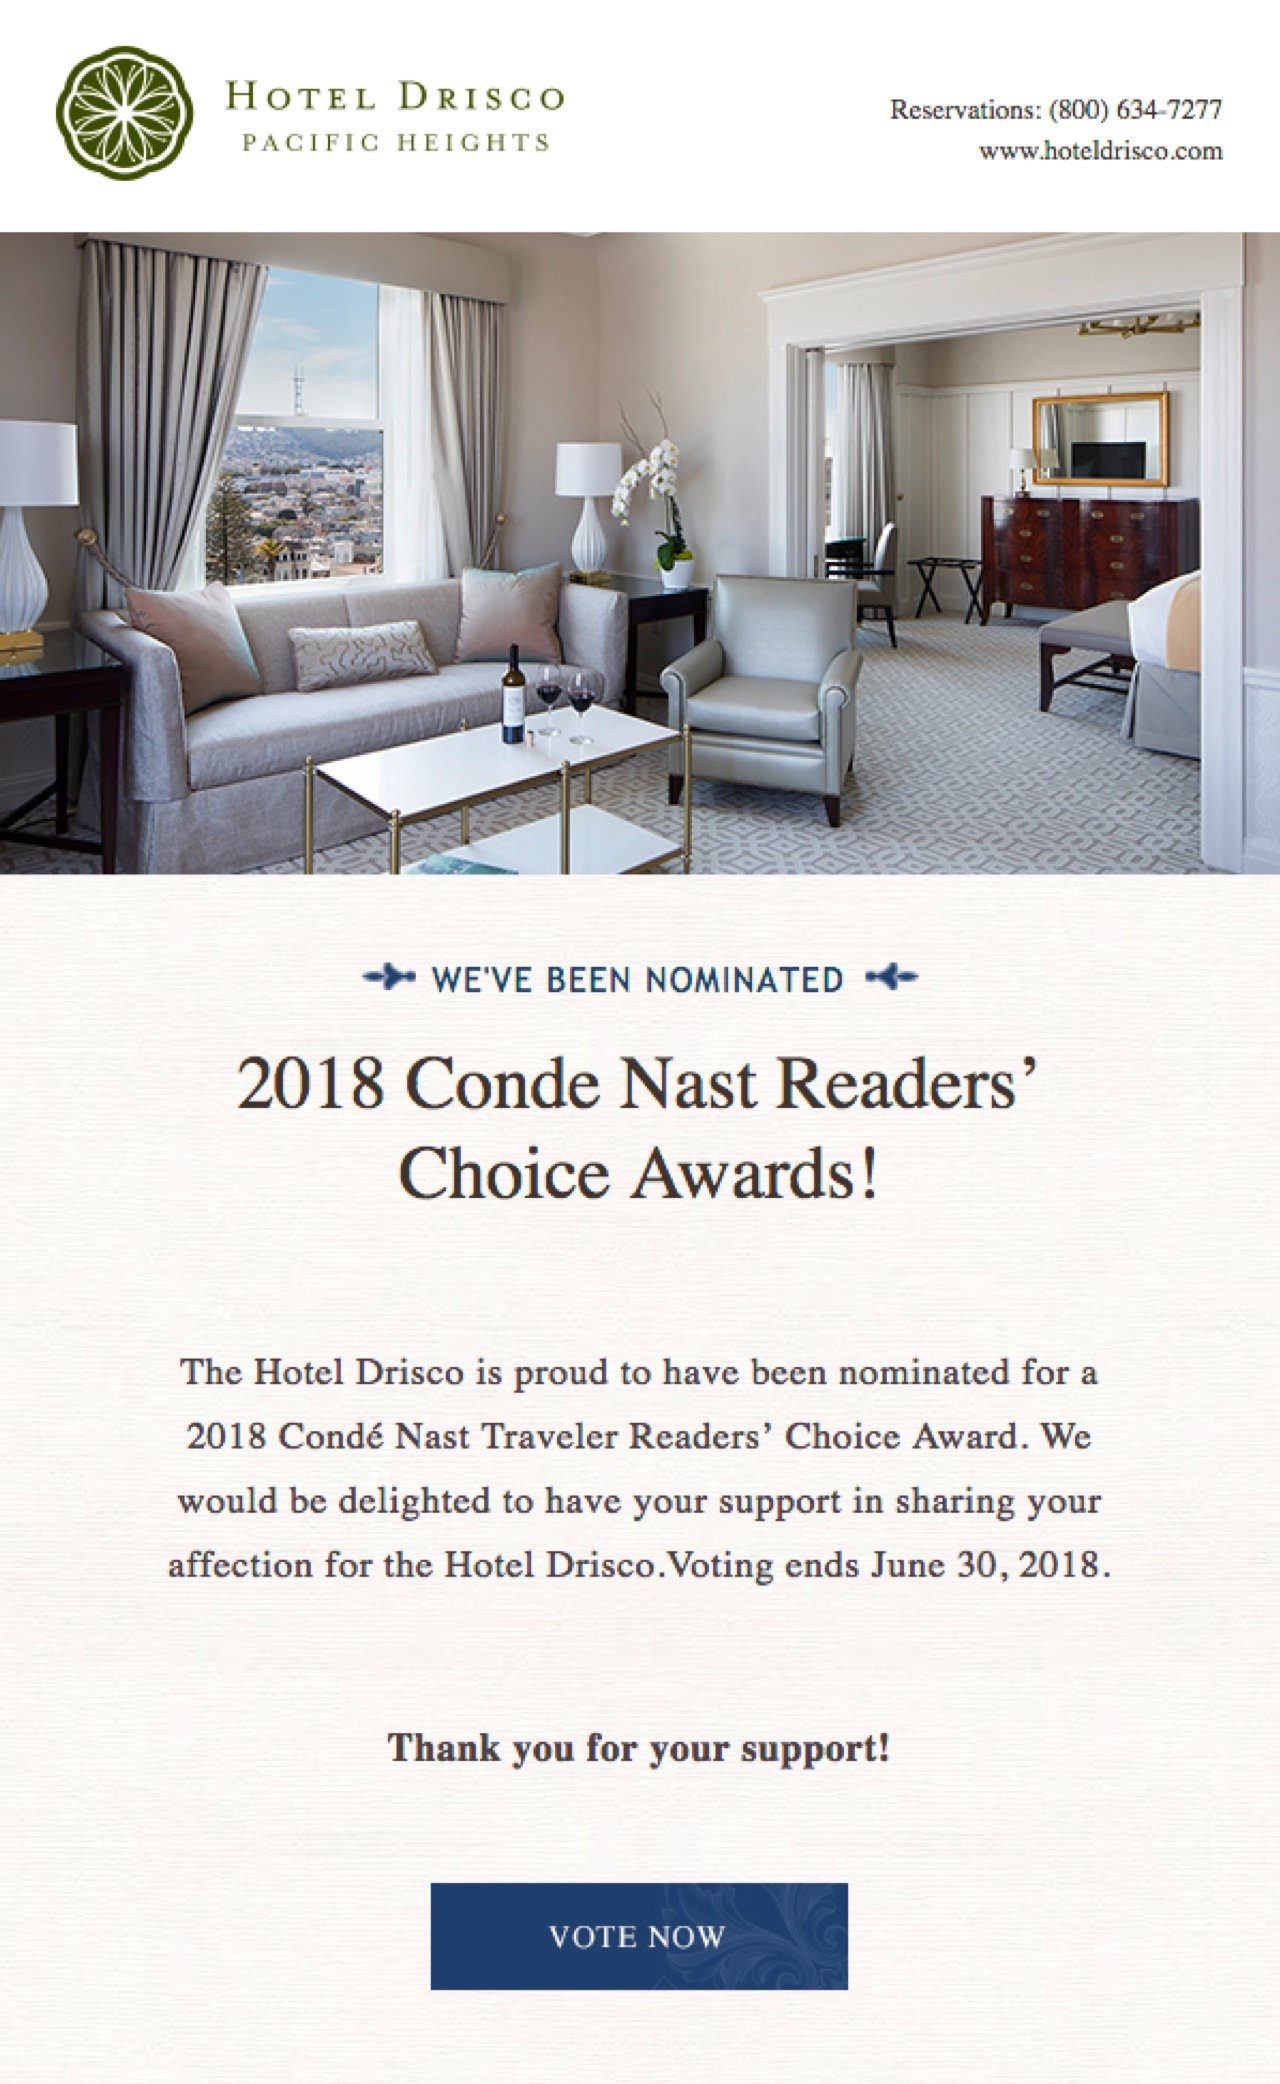 Hotel Drisco newsletter example